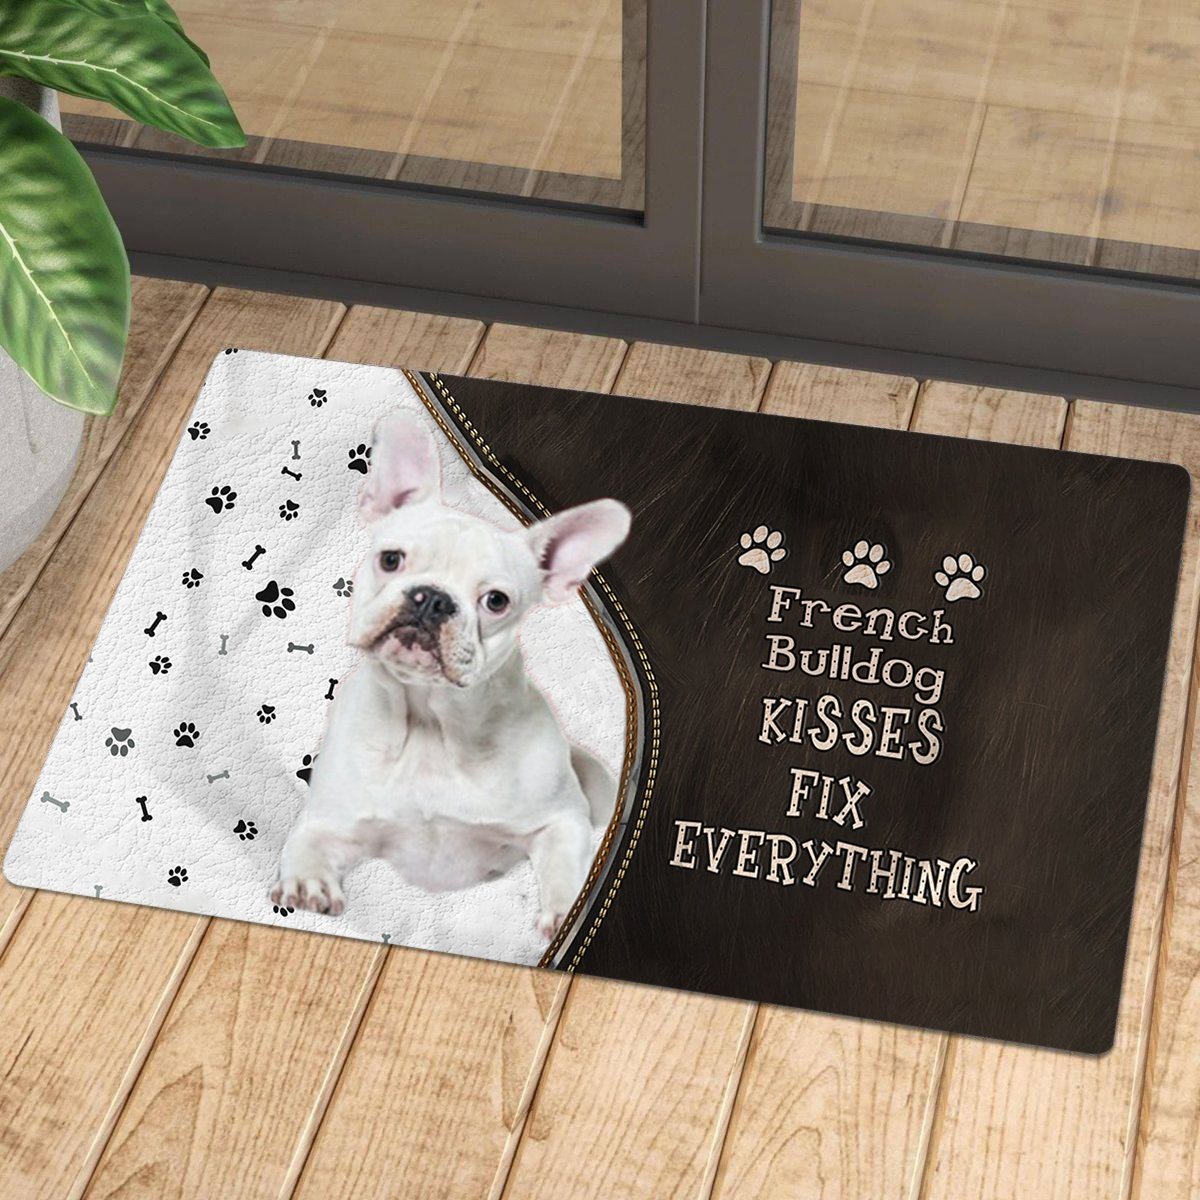 French Bulldog3 Kisses Fix Everything Doormat